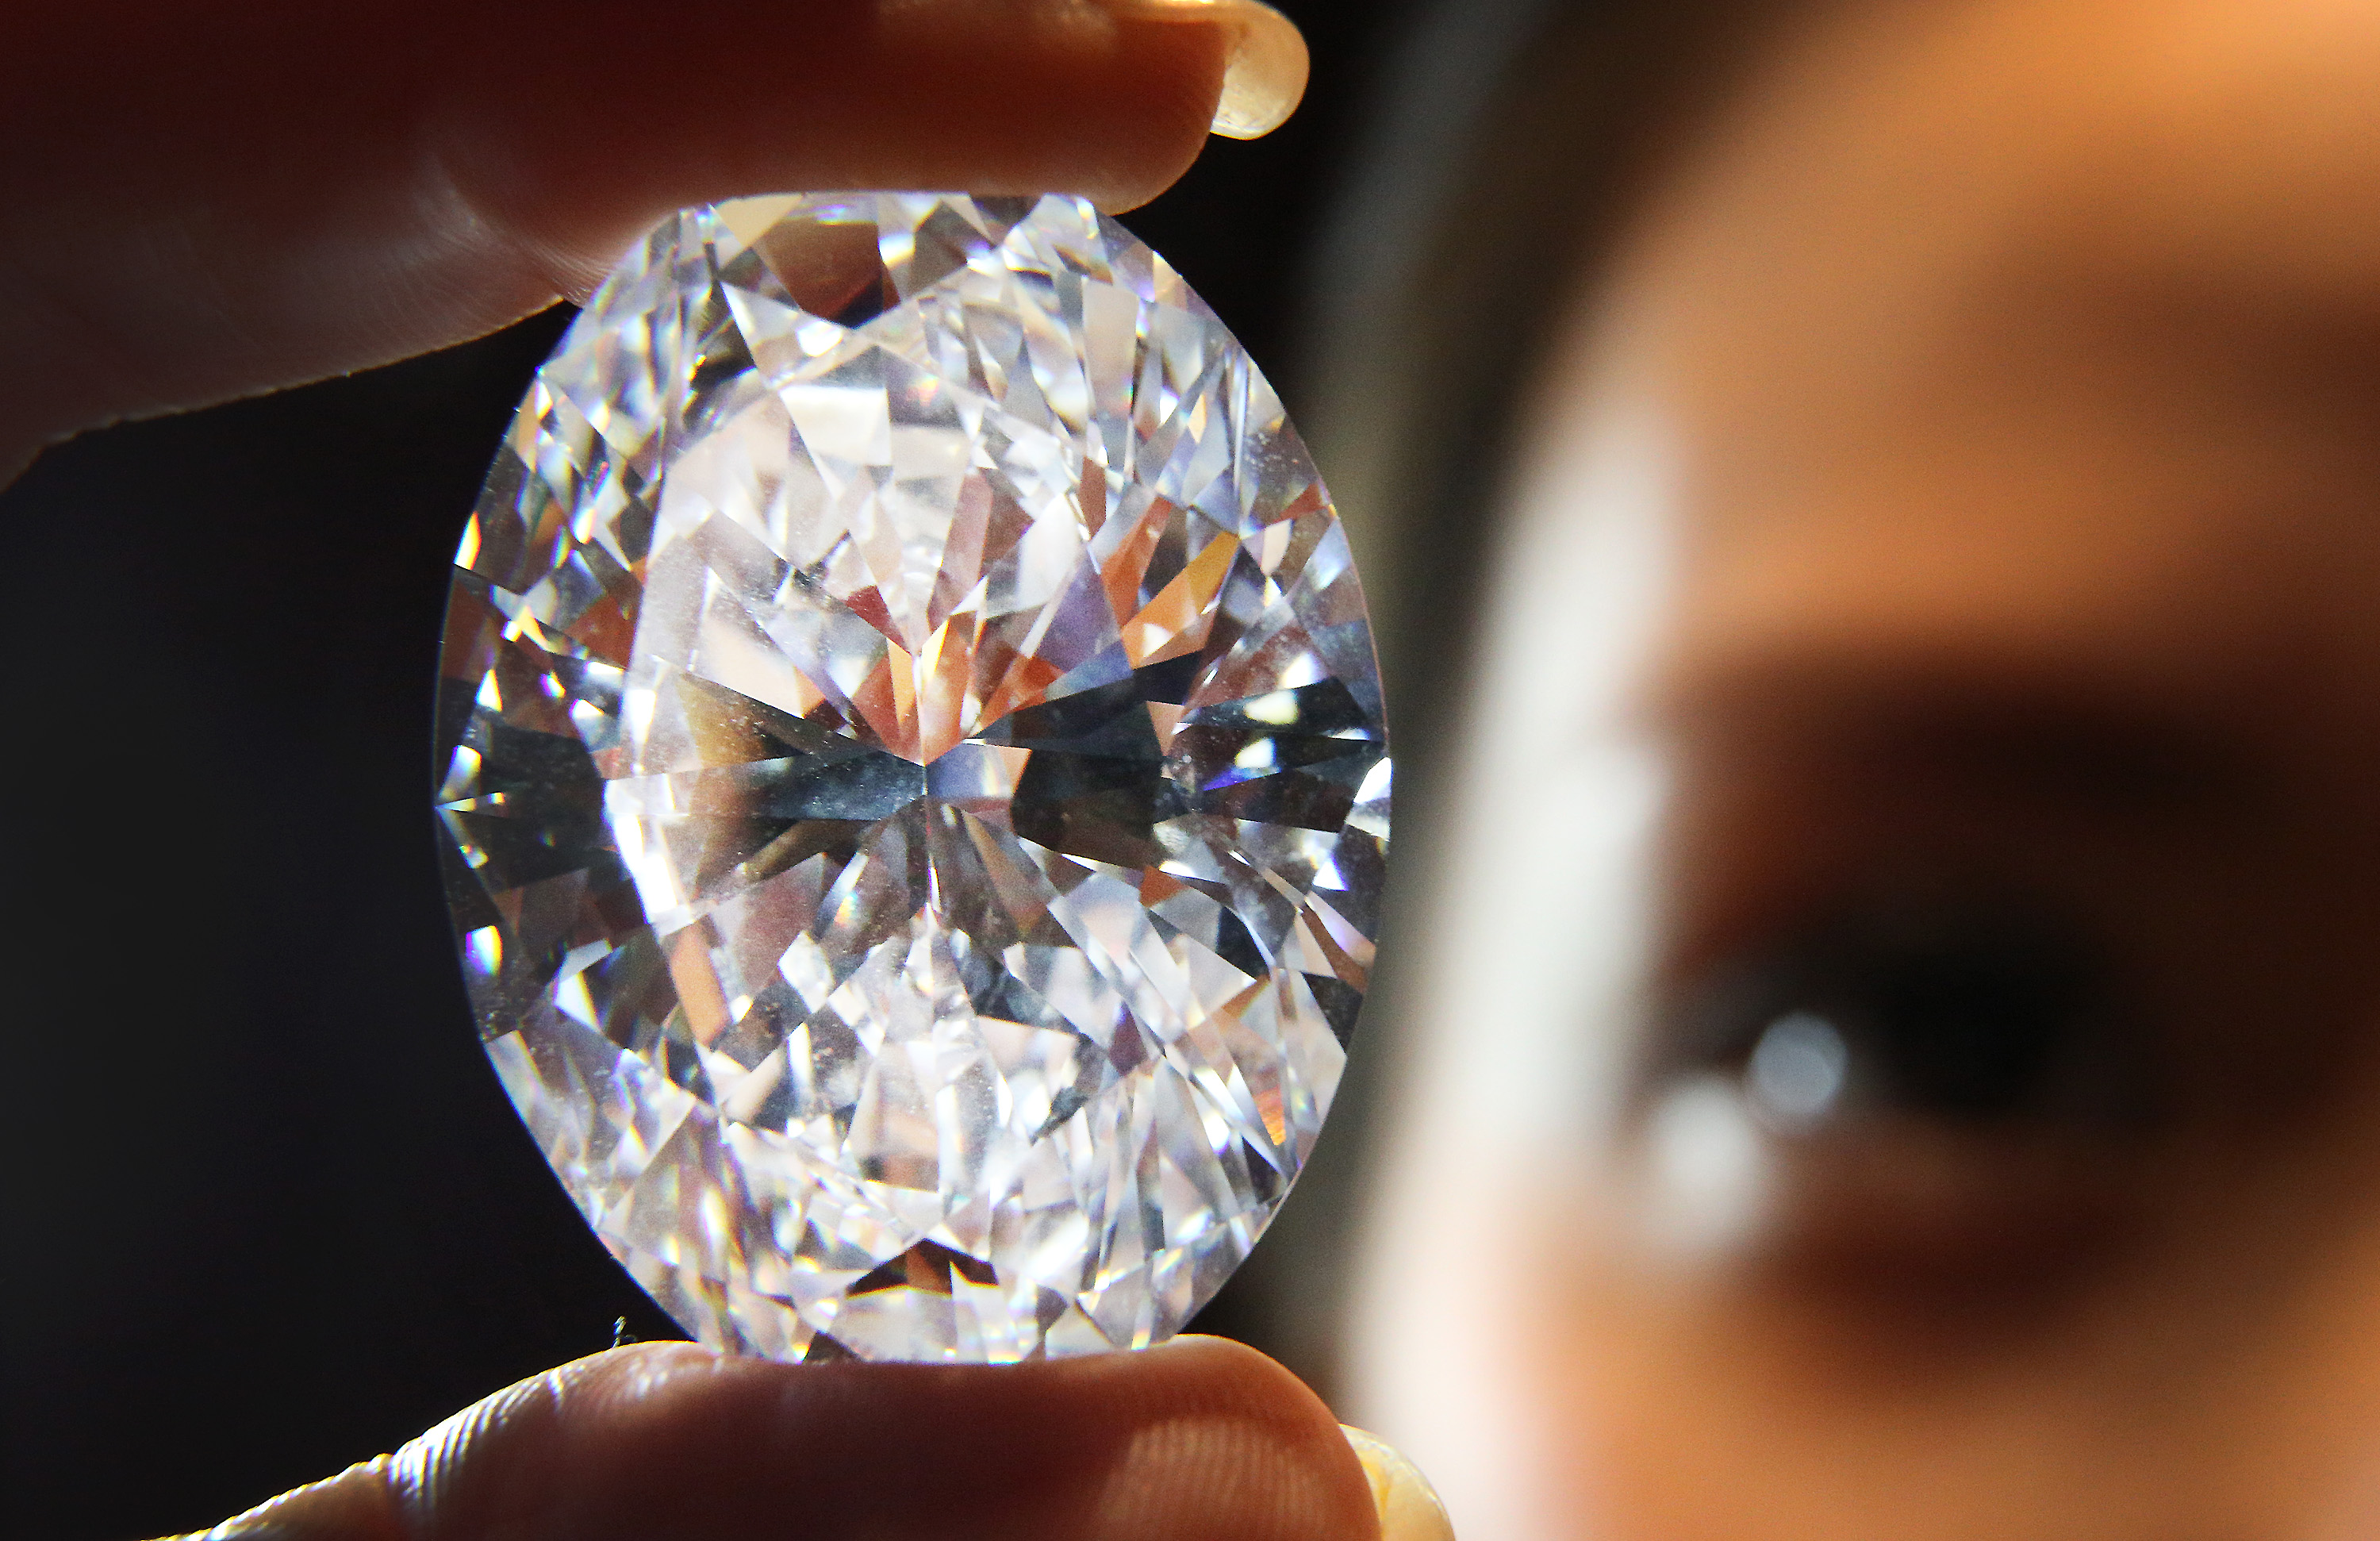 World's most expensive diamond goes for. pound of diamond worth. 